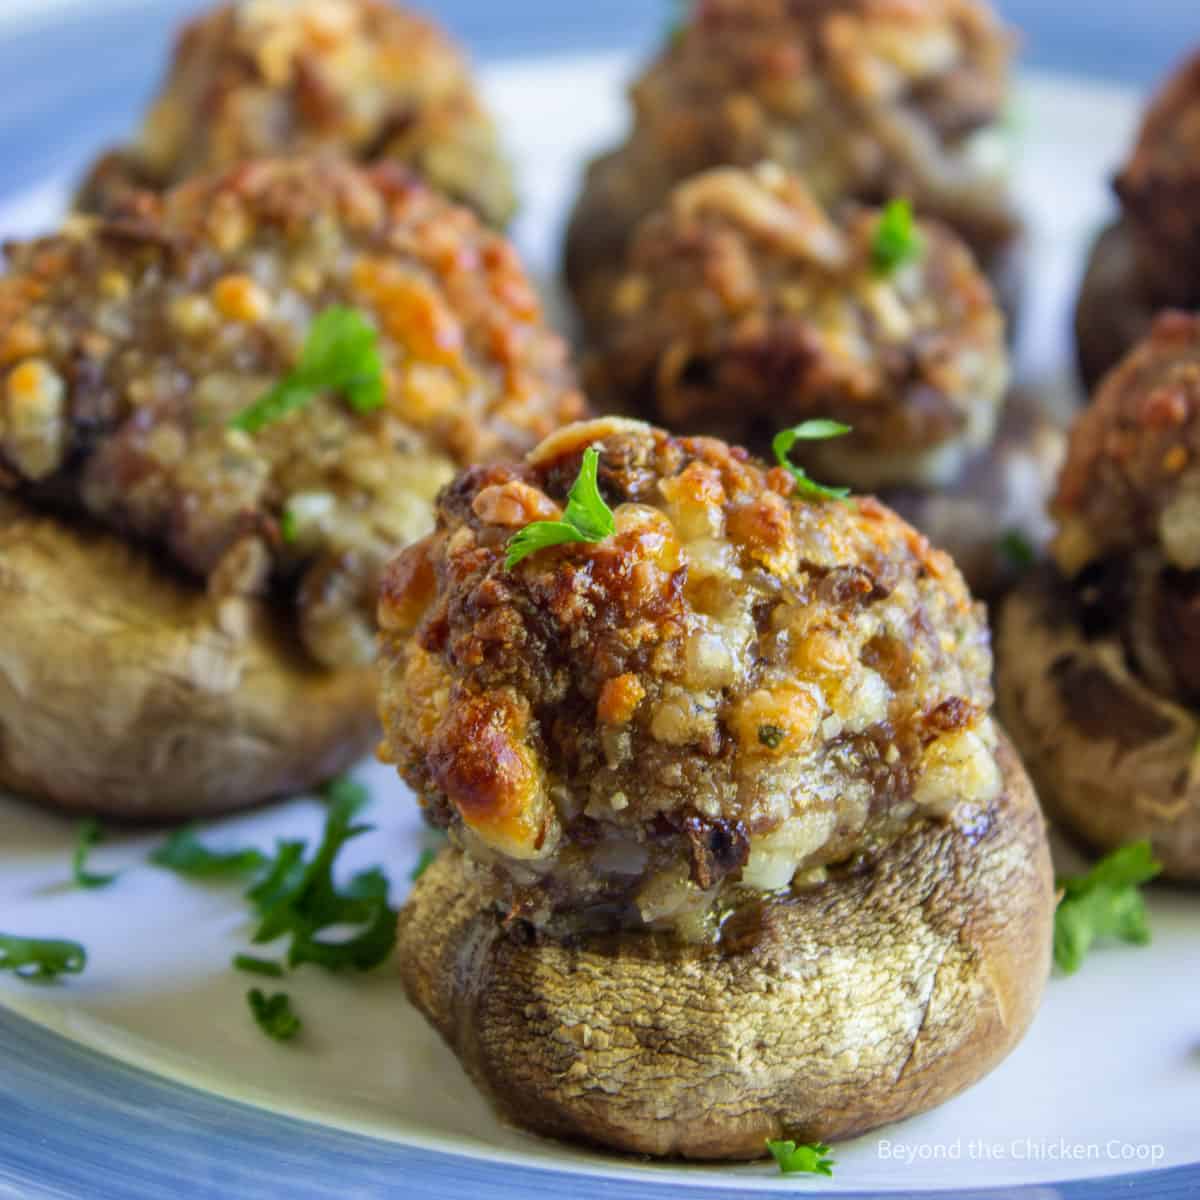 Stuffed mushrooms topped with freshly chopped parsley.